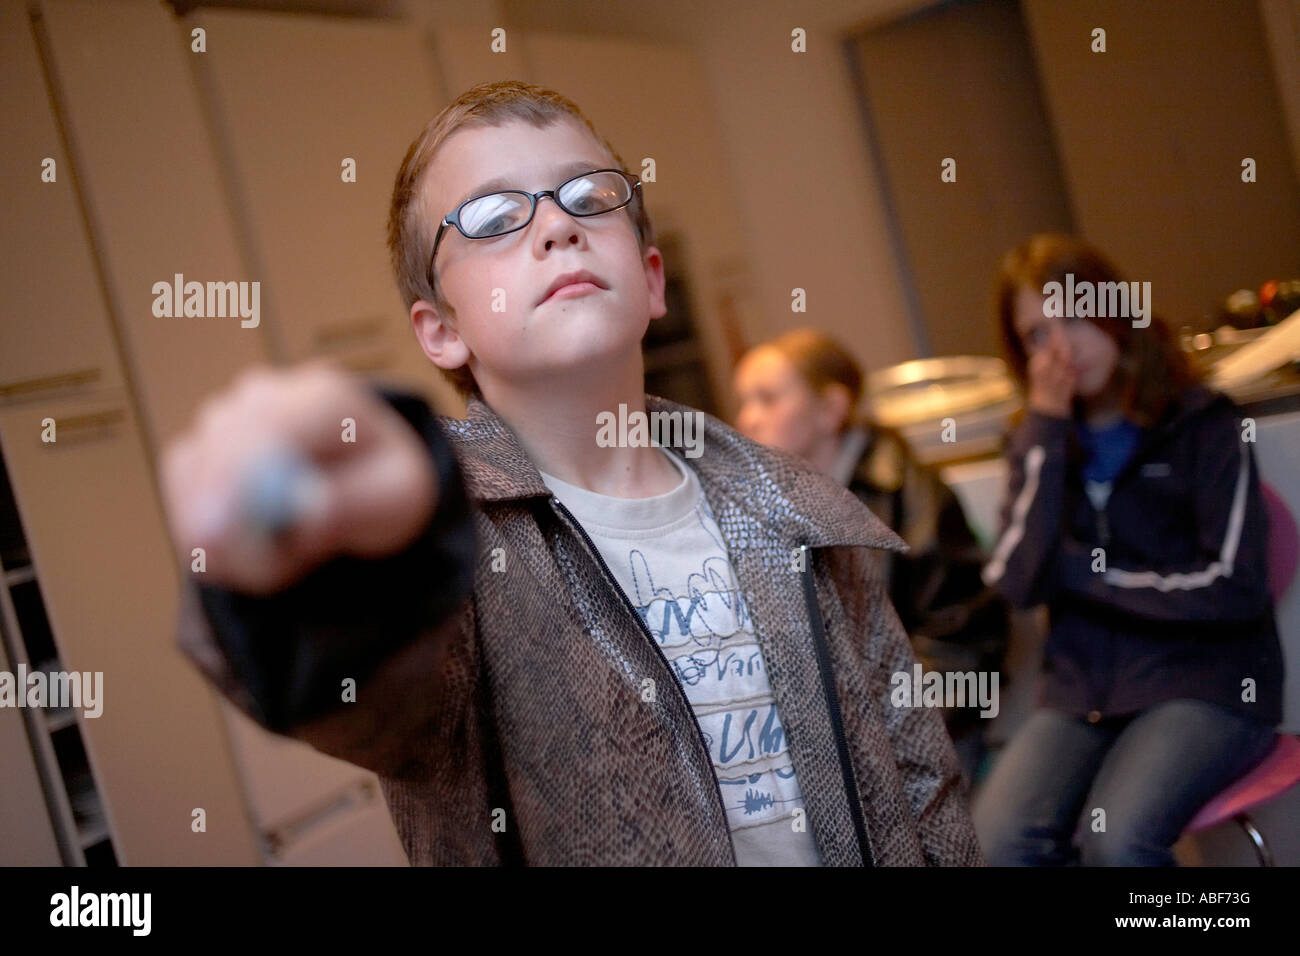 A nine year-old English boy wearing glasses waves a magic wand while playing a Harry Potter game with friends. Stock Photo